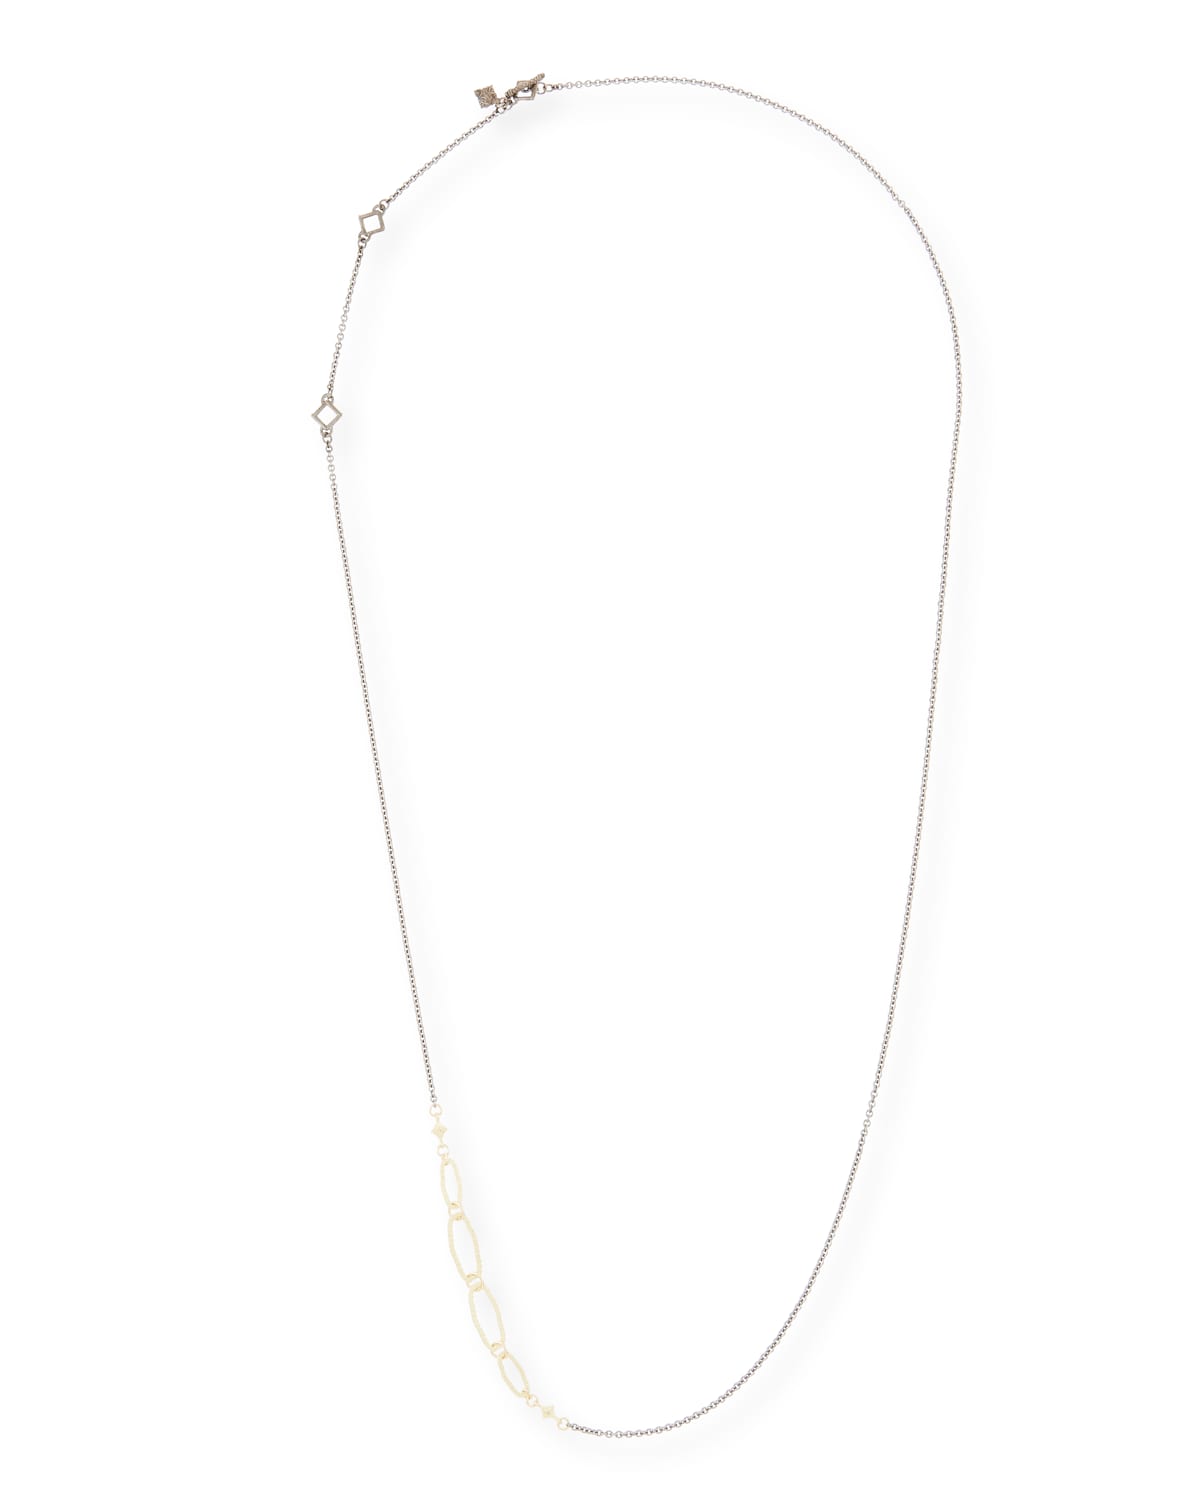 Armenta Old World Long Chain Necklace, 32"l